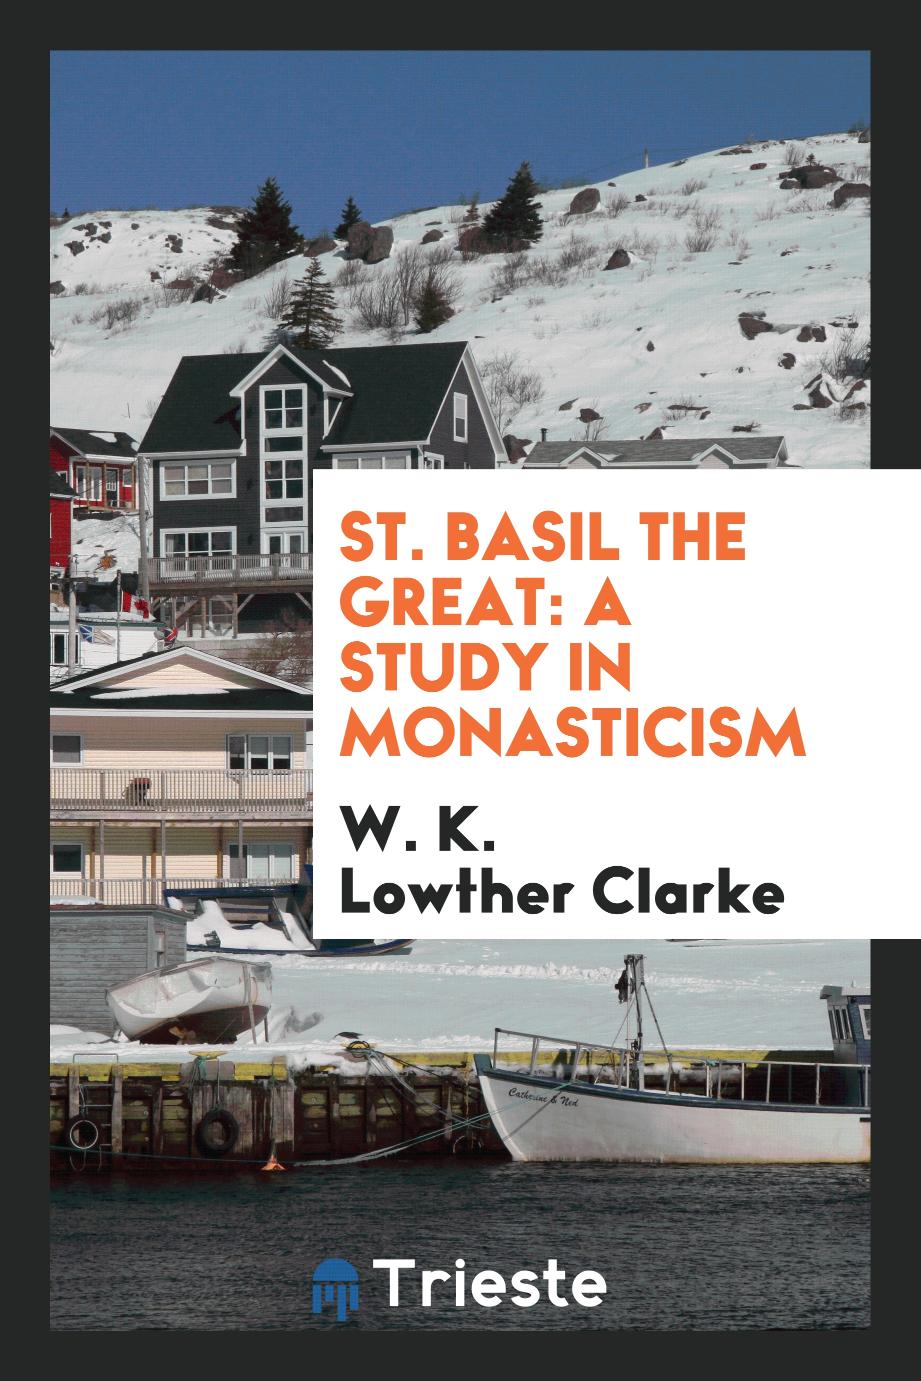 St. Basil the Great: a study in monasticism